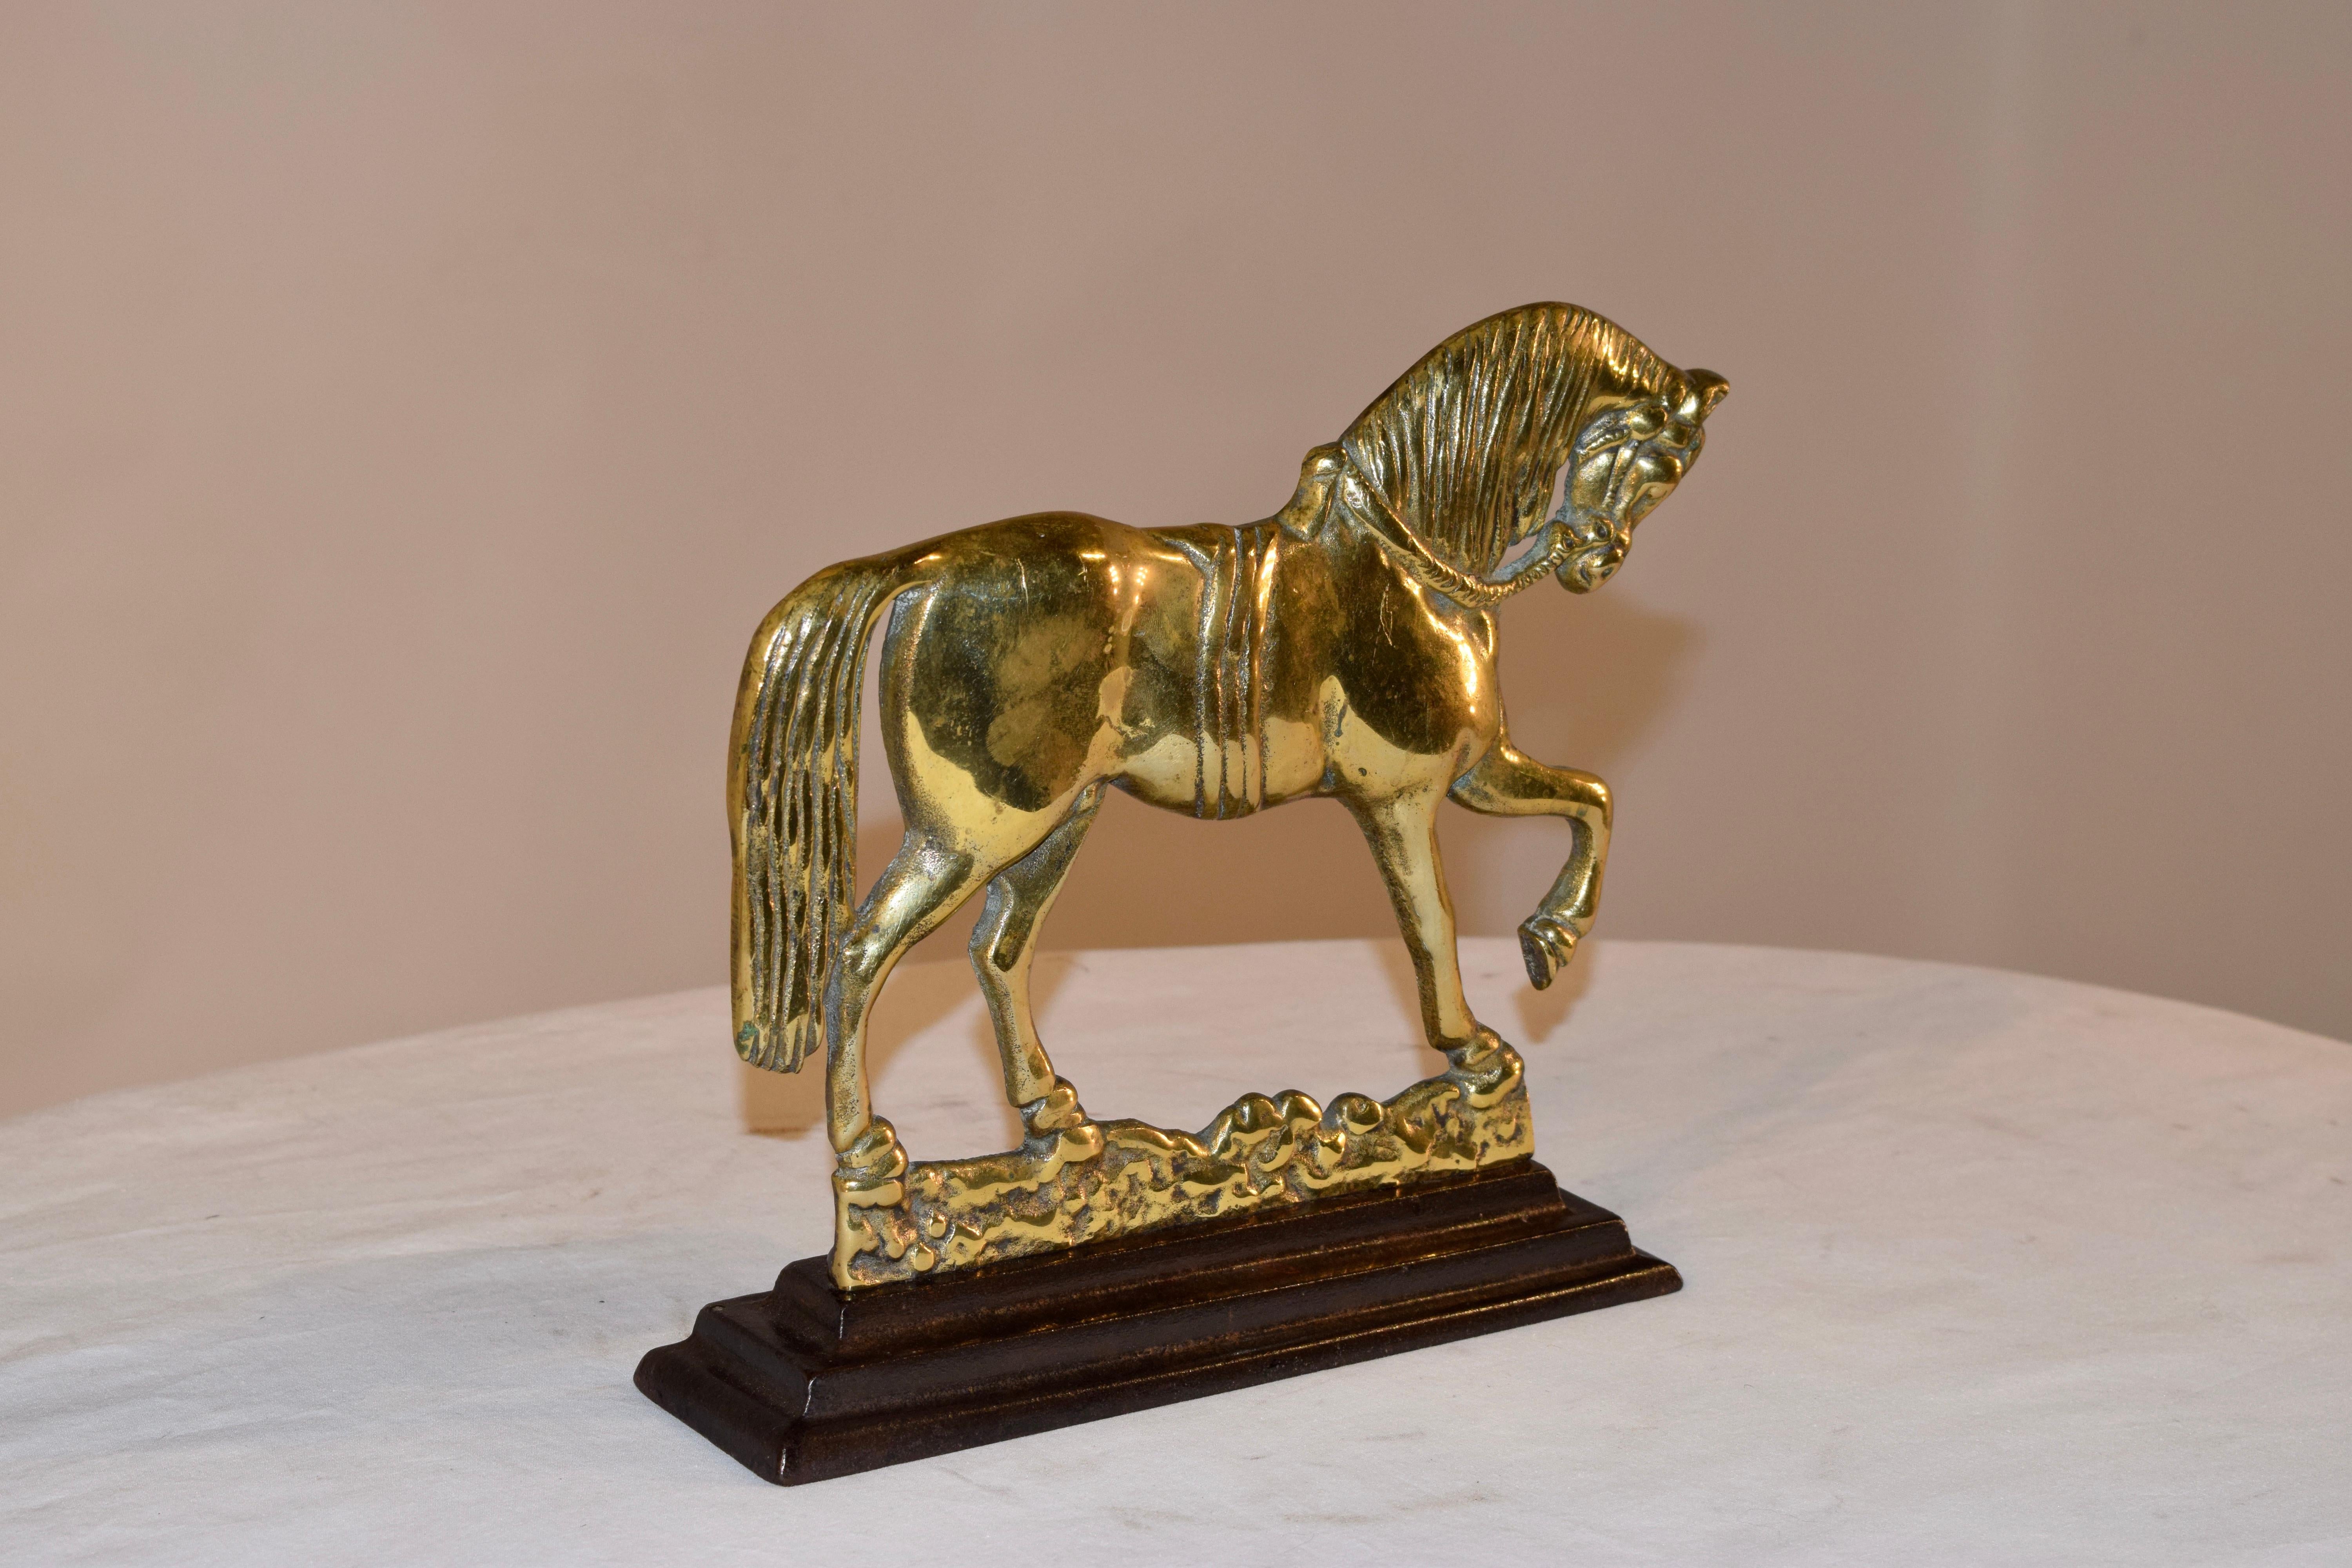 19th century horse mantle decoration from England made from hand cast brass, supported on an iron base. Great color.